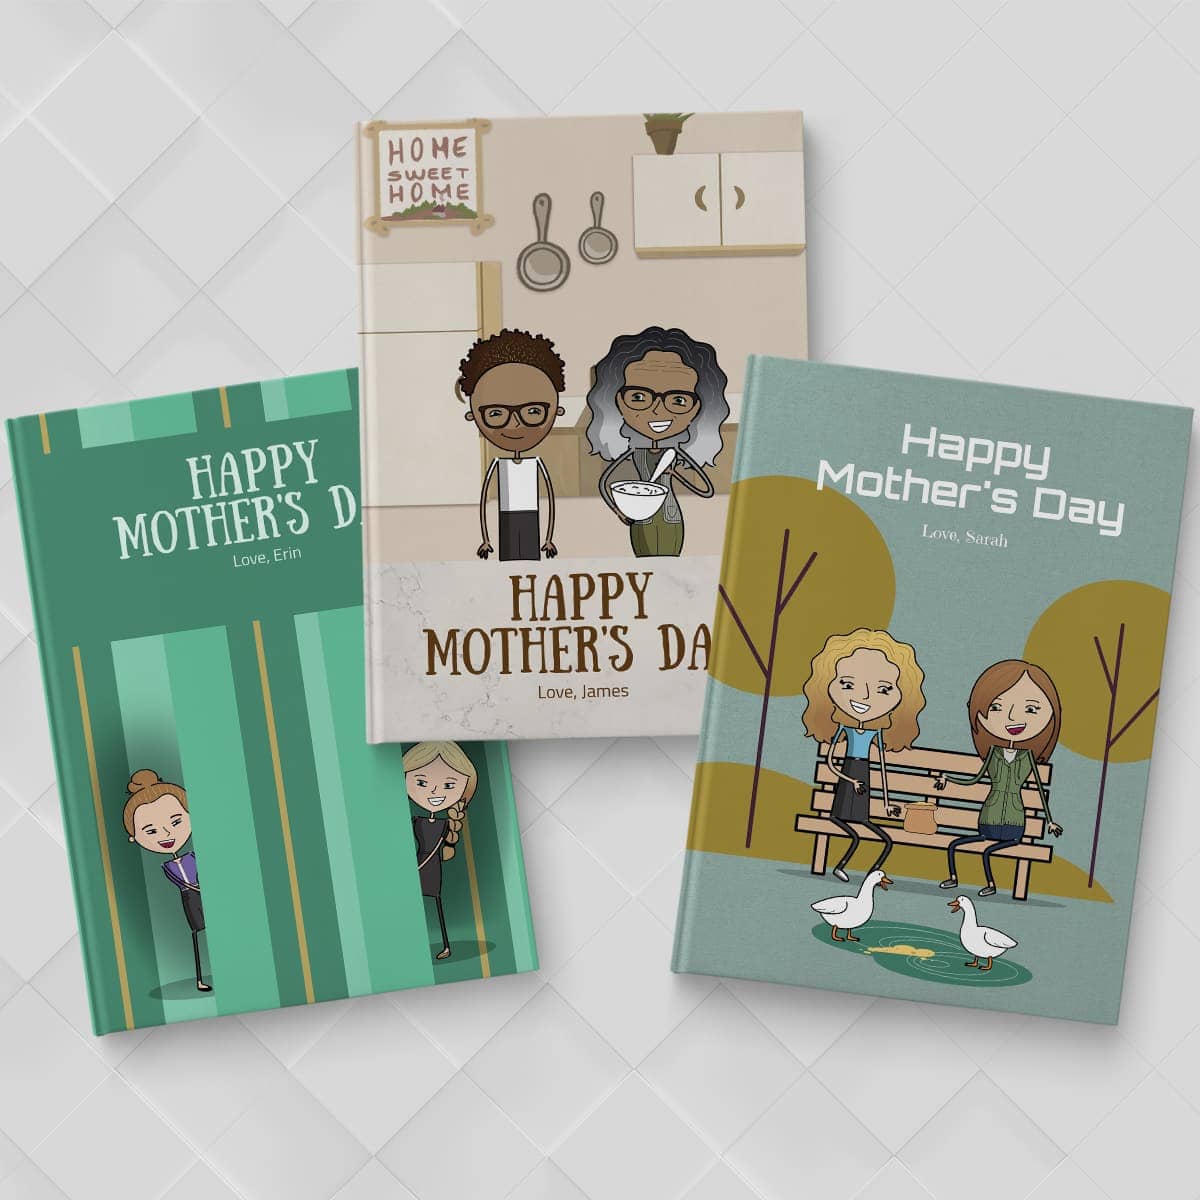 Mothers Day Gifts by LoveBook | The Personalized Gift Book That Says Why You Love Someone | LoveBook Online - 1